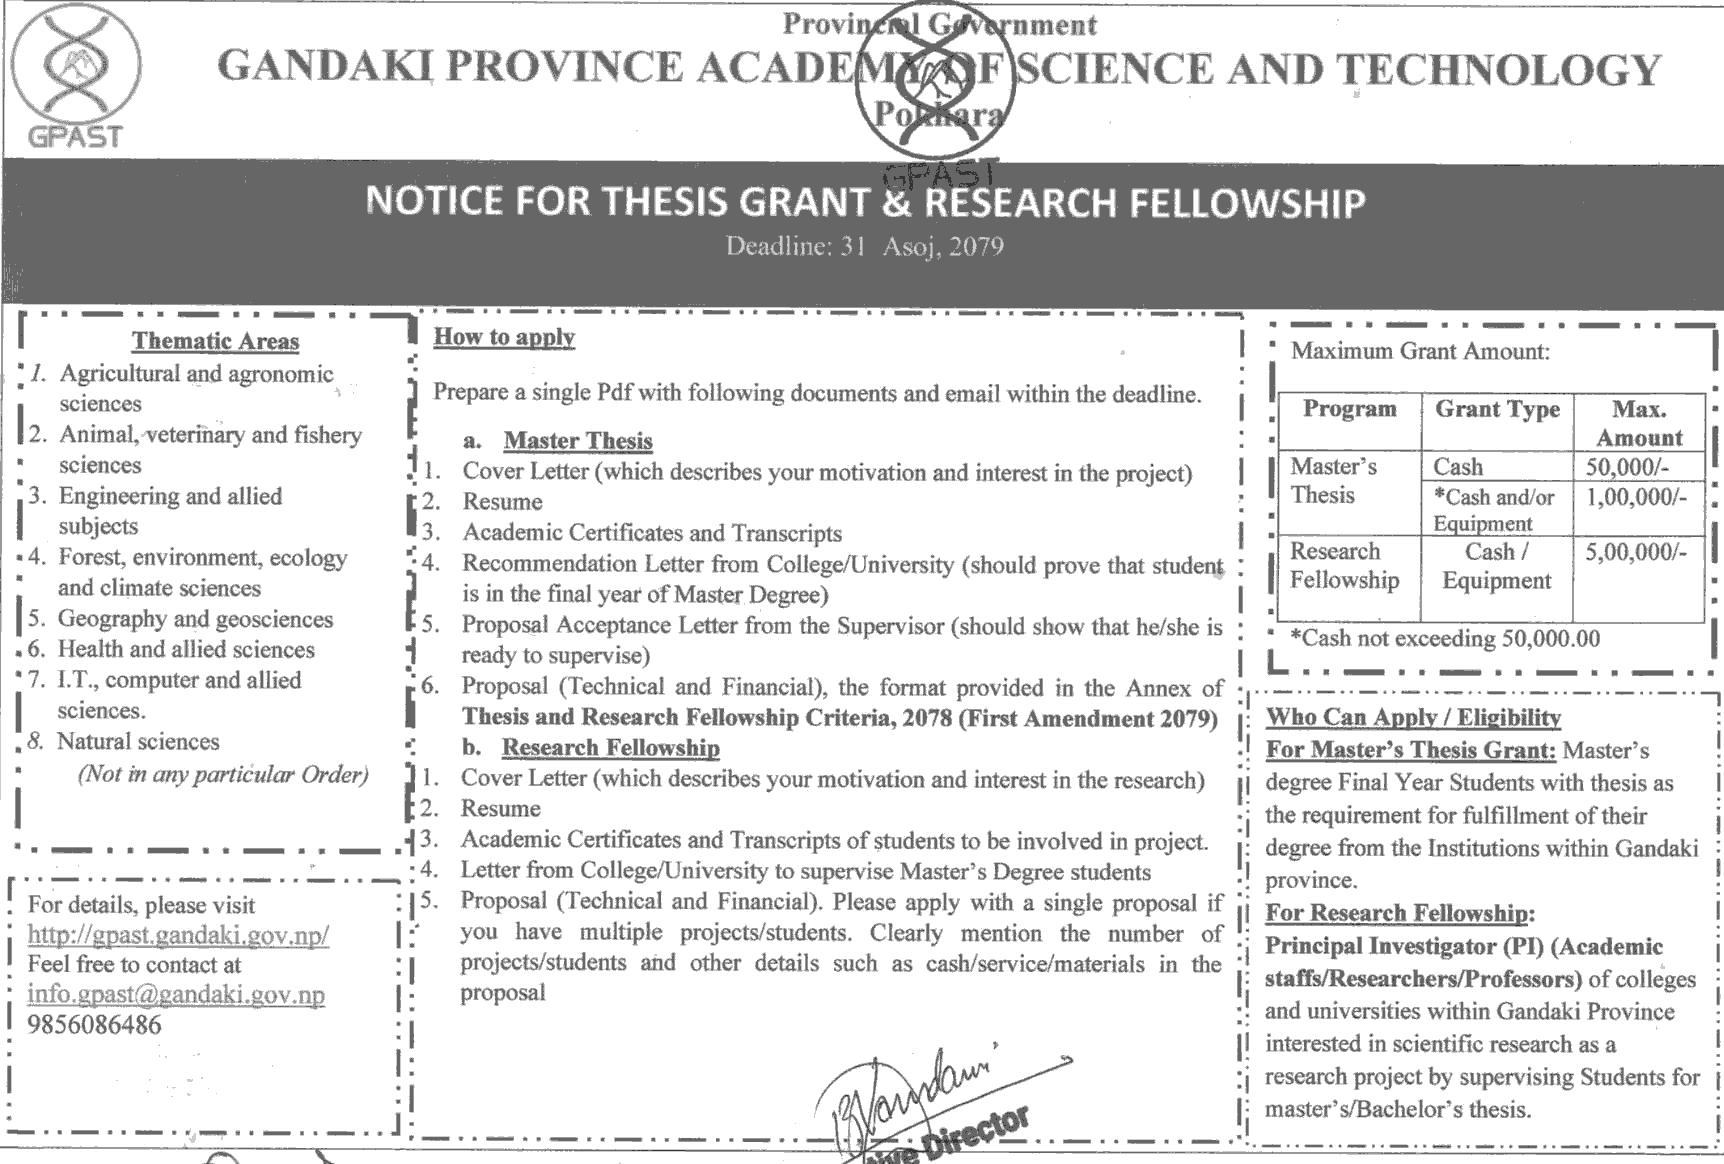 GPAST Call For Thesis Grant and Research Fellowship Program